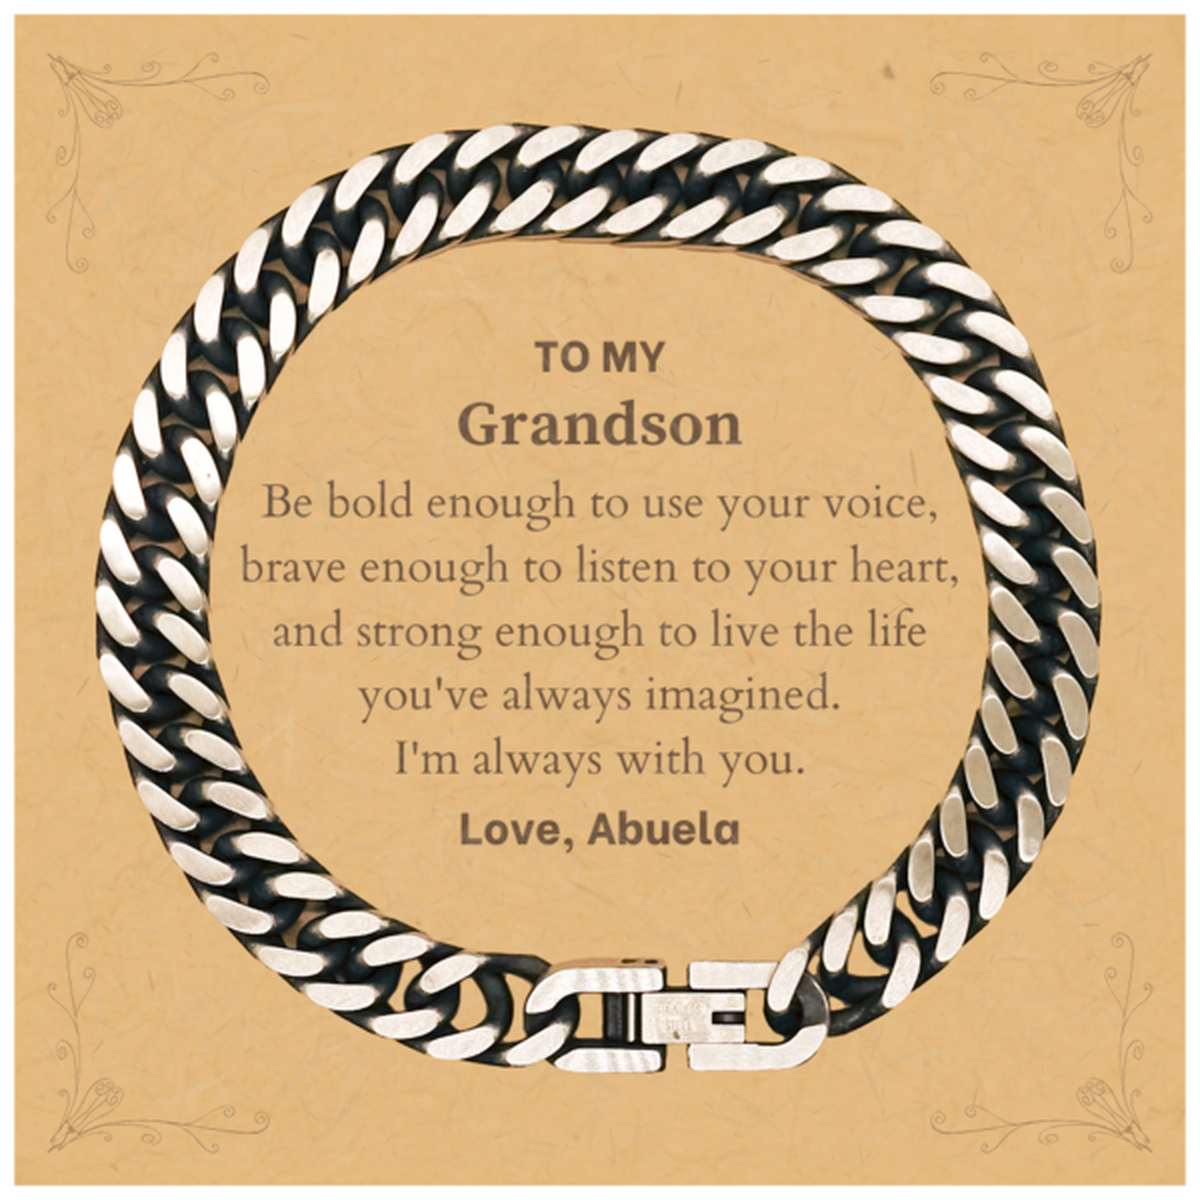 Keepsake Grandson Cuban Link Chain Bracelet Gift Idea Graduation Christmas Birthday Grandson from Abuela, Grandson Be bold enough to use your voice, brave enough to listen to your heart. Love, Abuela